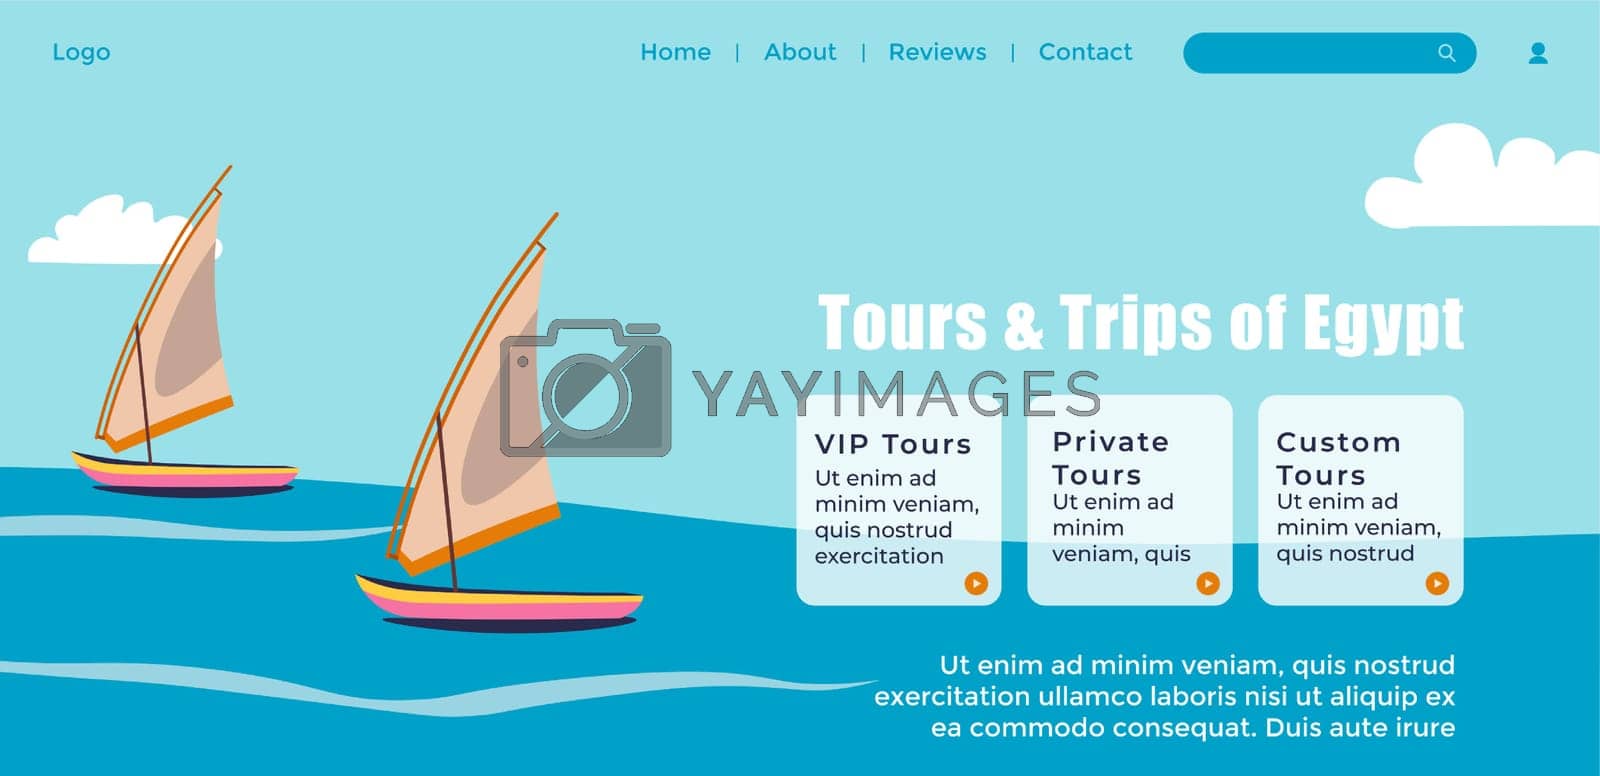 Royalty free image of Individual and private VIP tours for Egypt trip by Sonulkaster